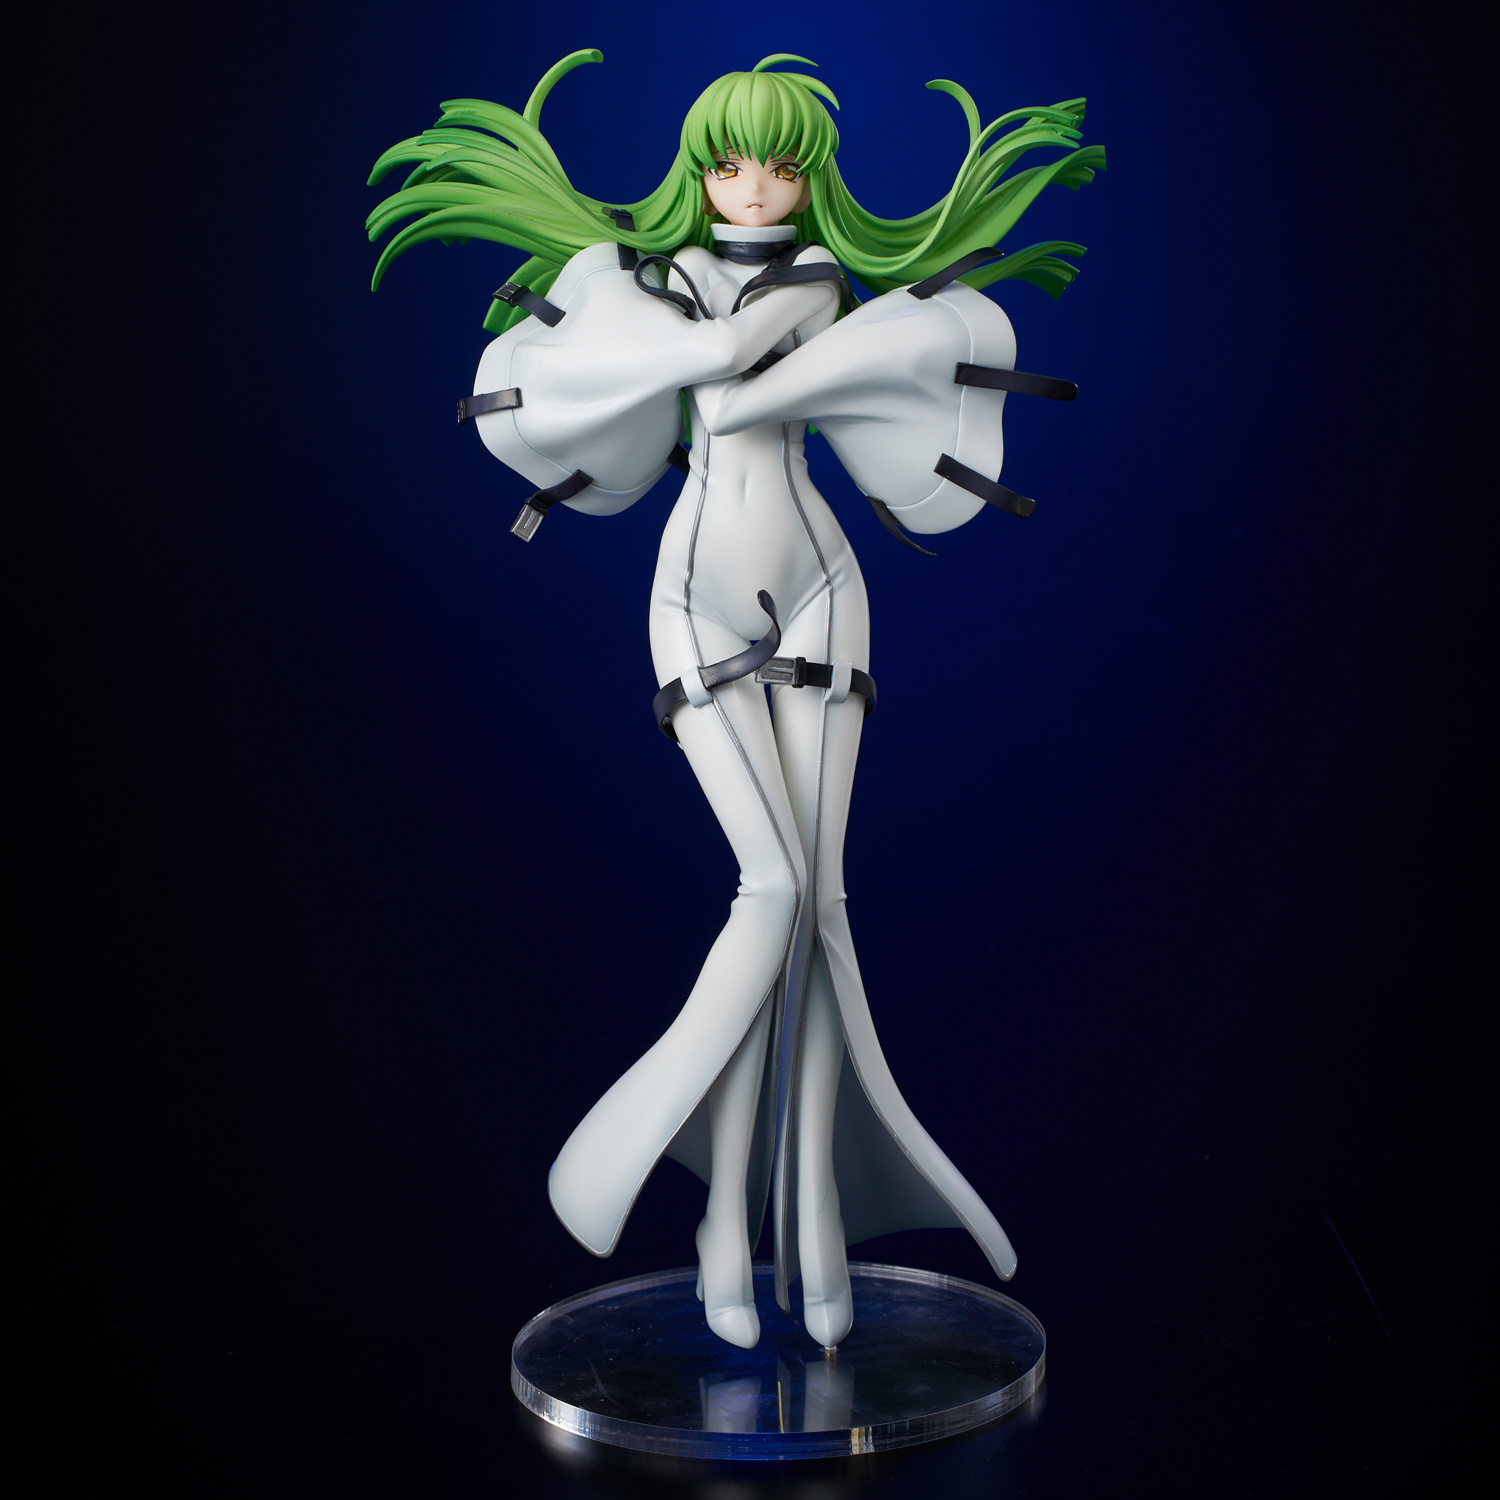 CDJapan : Code Geass Lelouch of the Rebellion Newly Drawn Large